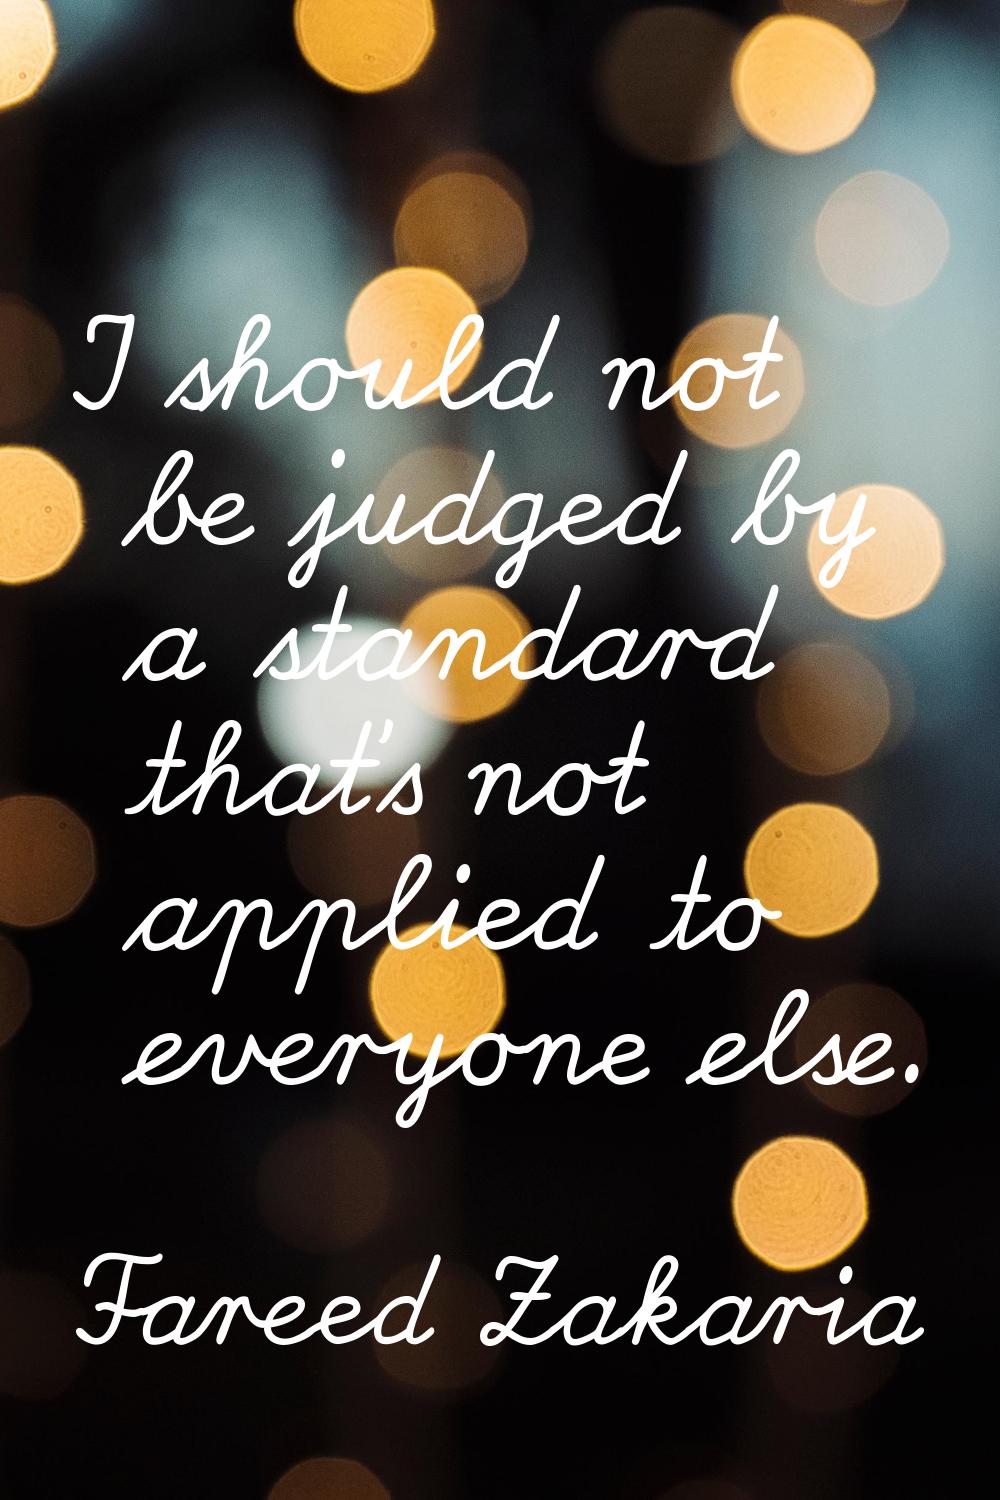 I should not be judged by a standard that's not applied to everyone else.